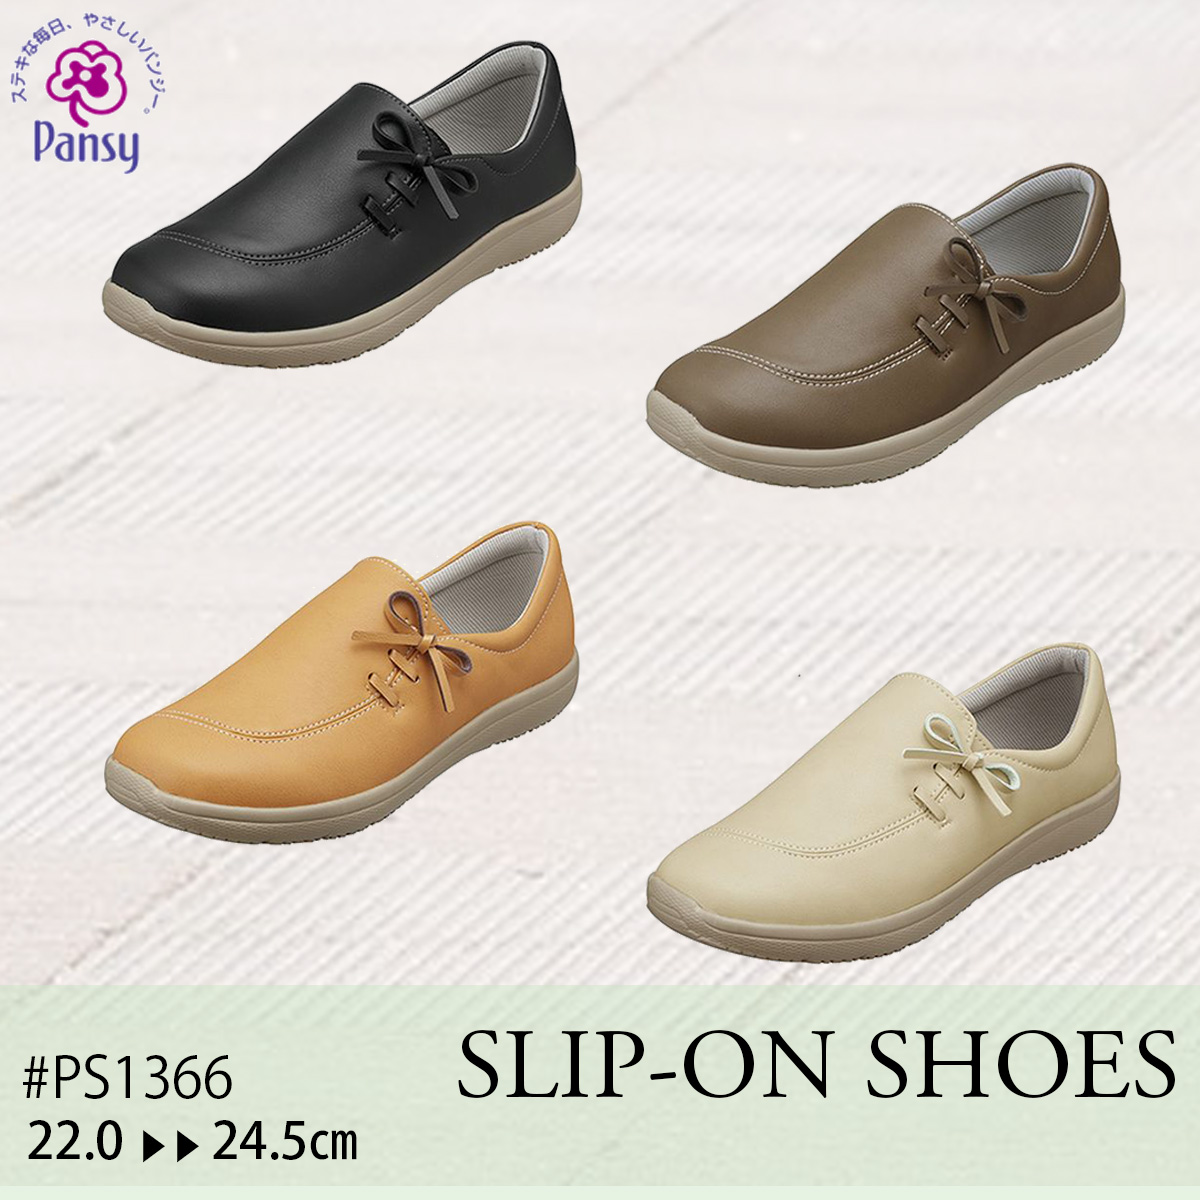  lady's shoes slip-on shoes pansy PS1366 3E lady's shoes light weight put on footwear ........ black Brown Camel ivory pansy